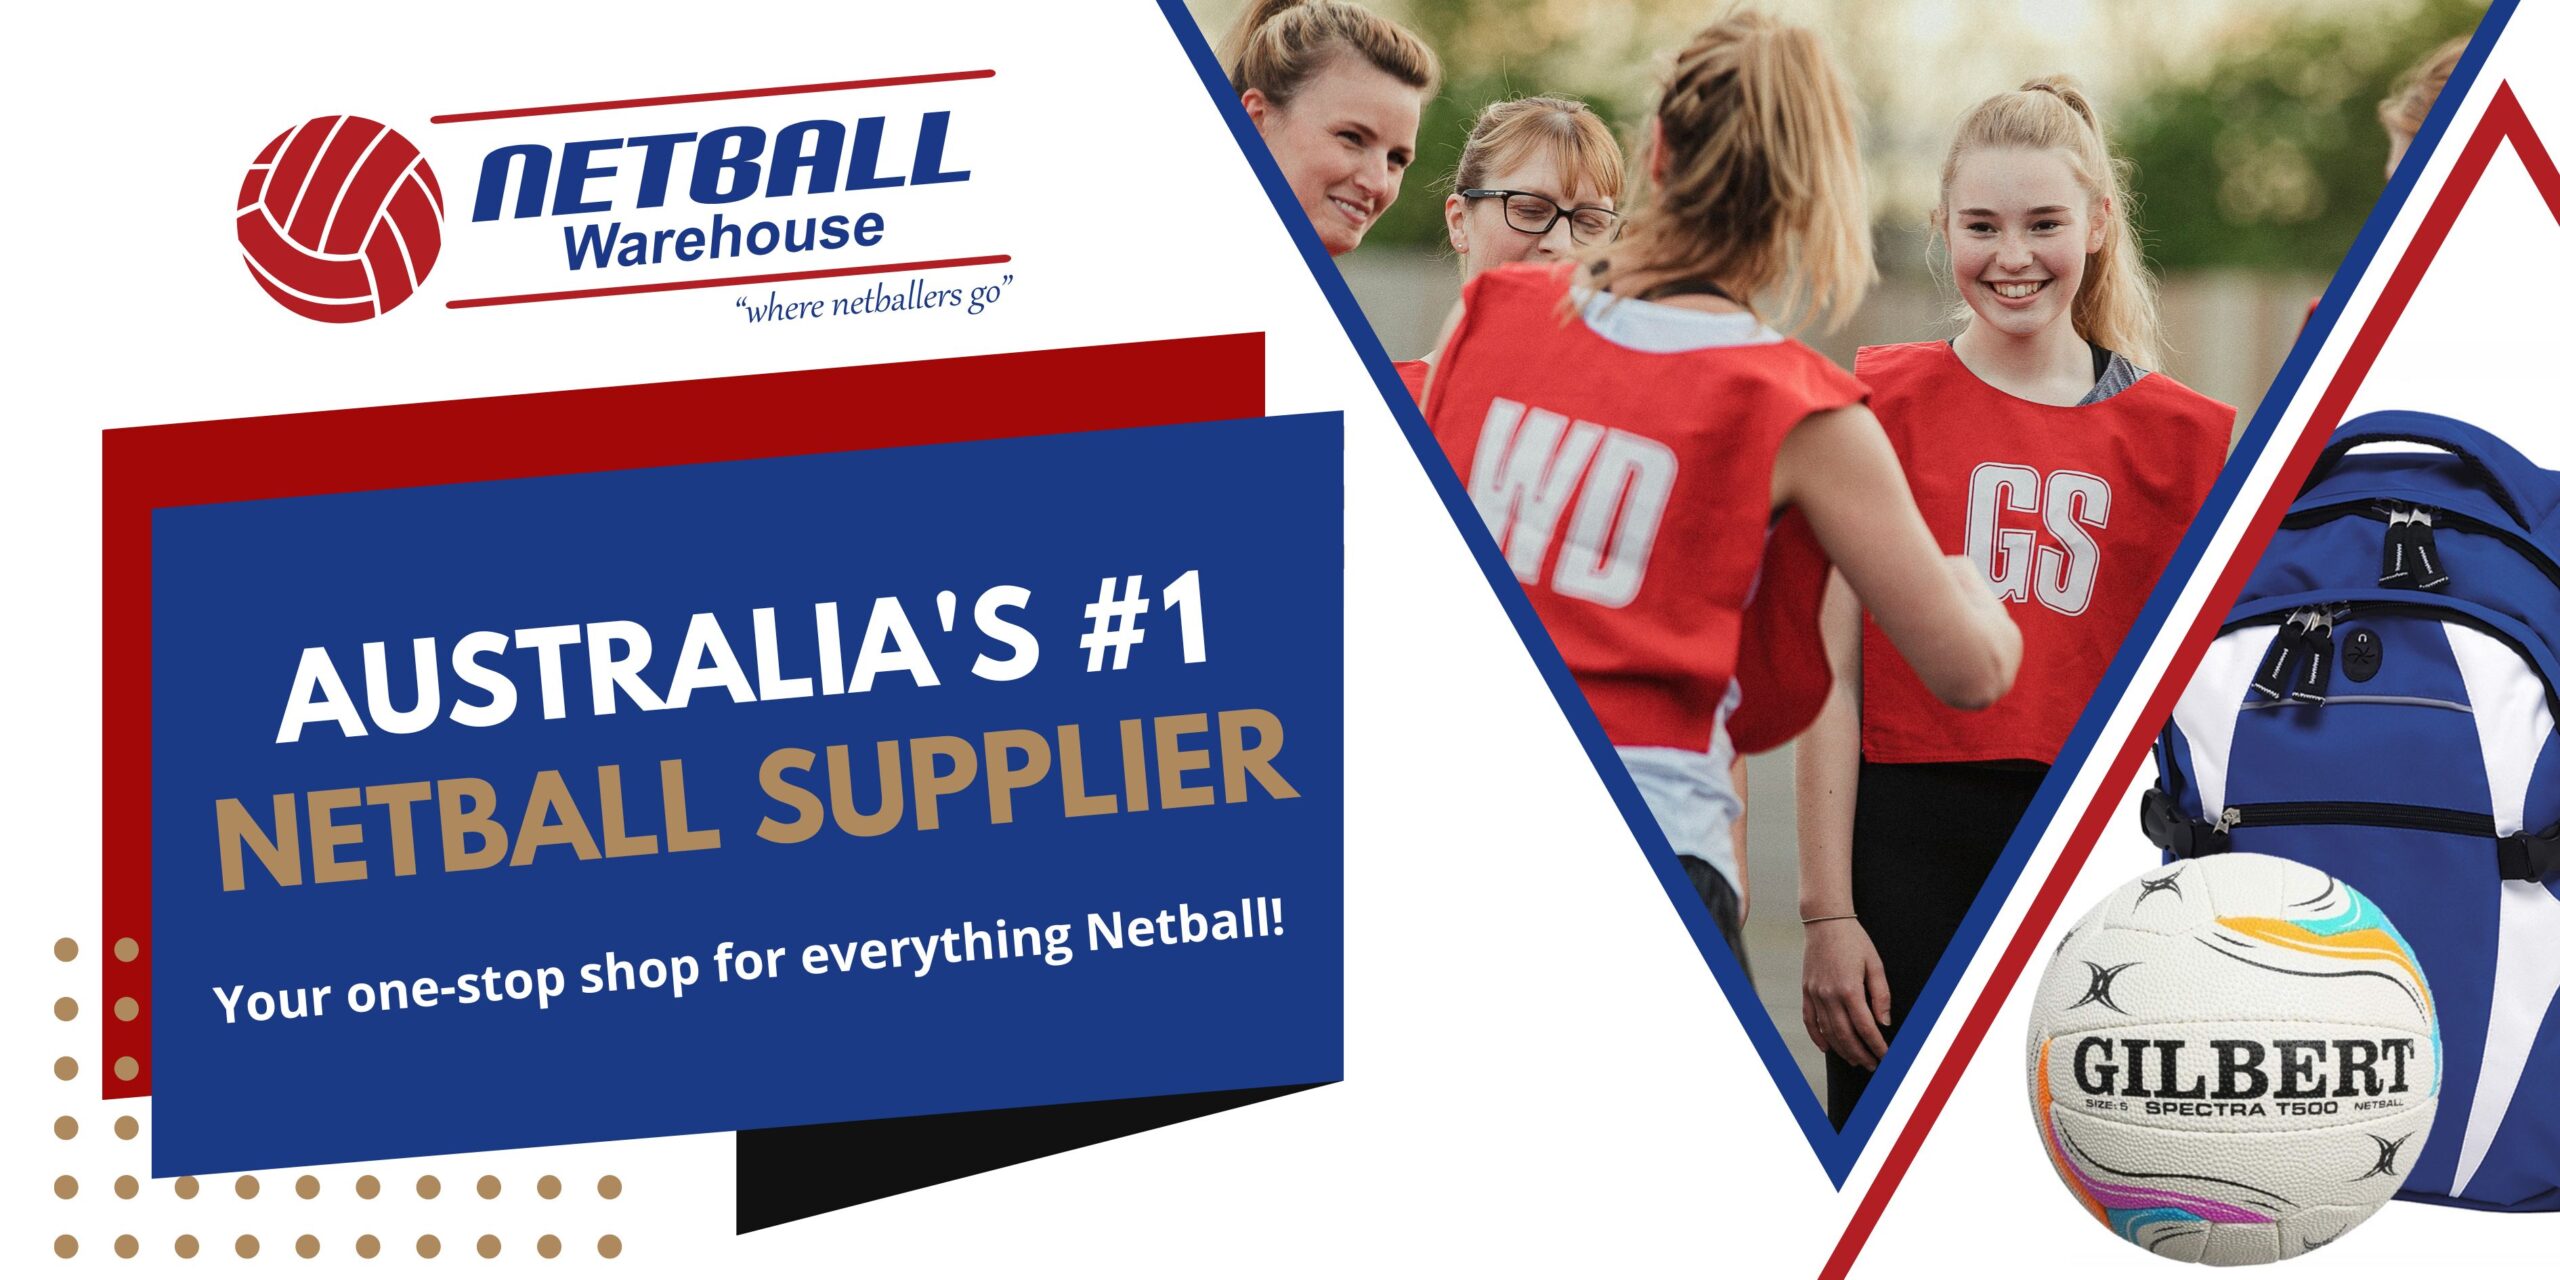 Netball Warehouse - Australia’s No 1 Netball supplier.  Your one-stop shop for everything Netball.